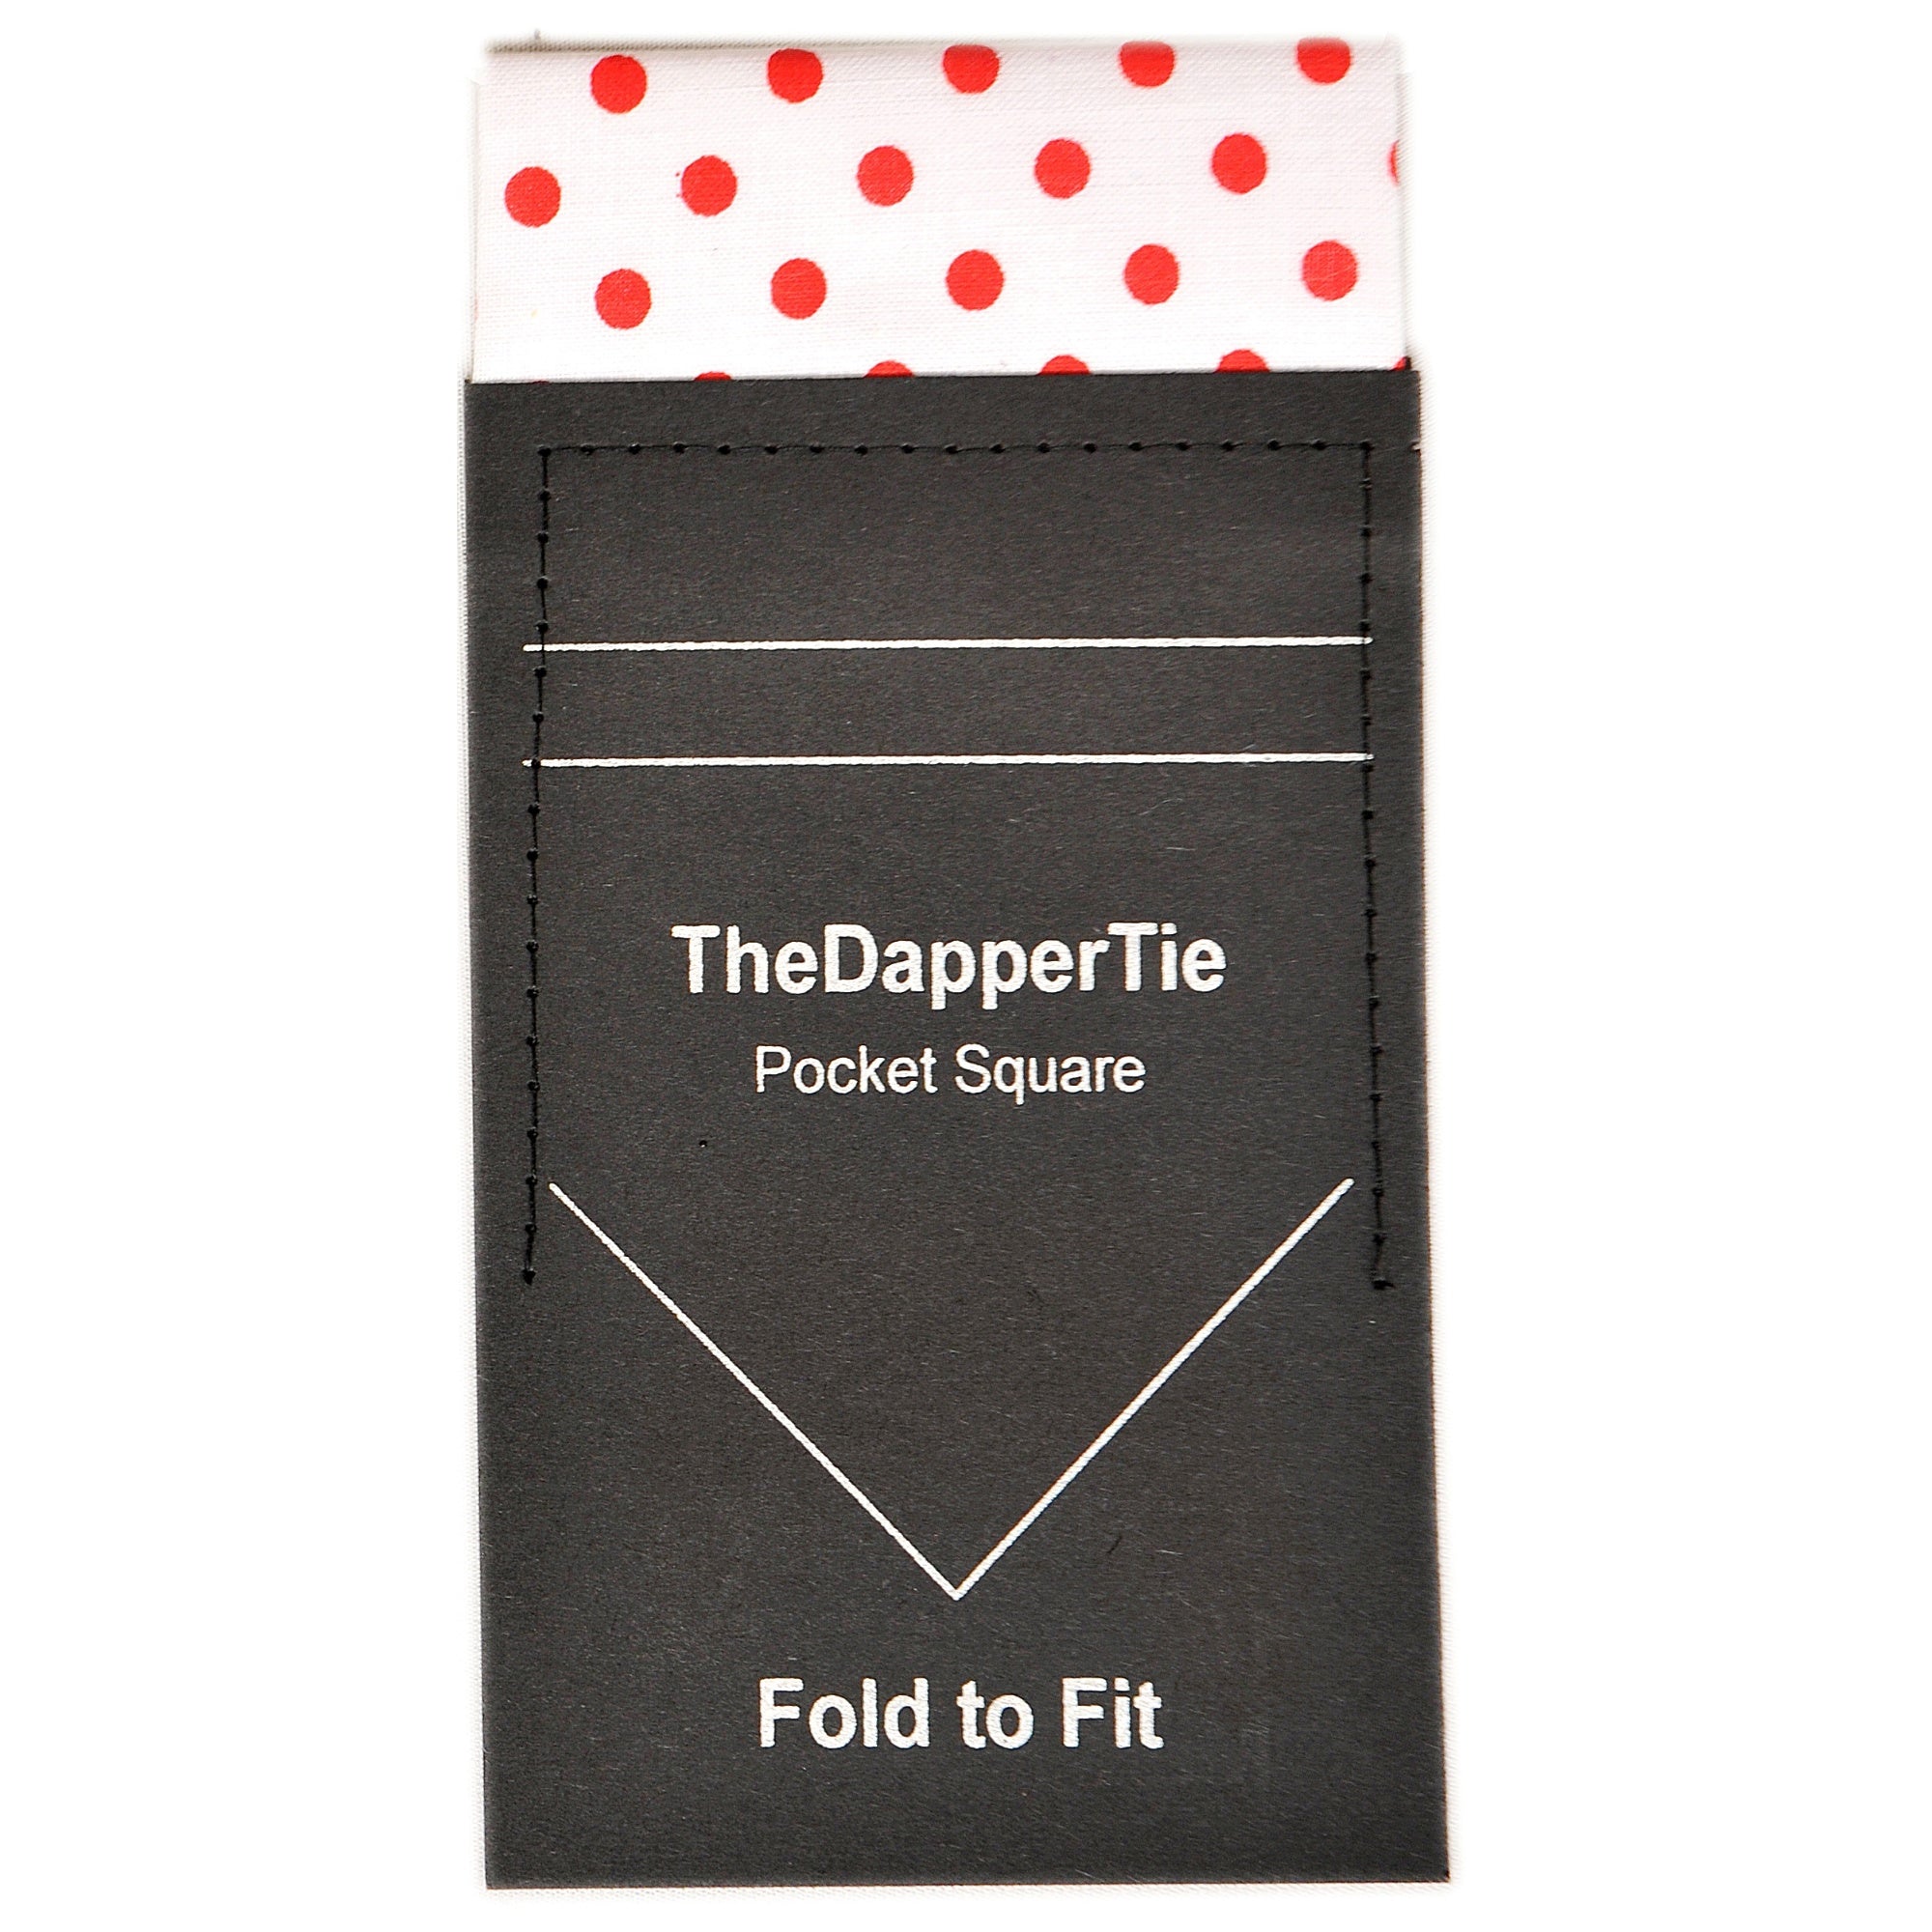 New Men's Polka Dots 100% Cotton Flat Pre Folded Pocket Square on Card - TheDapperTie Prefolded Pocket Squares TheDapperTie White & Red  